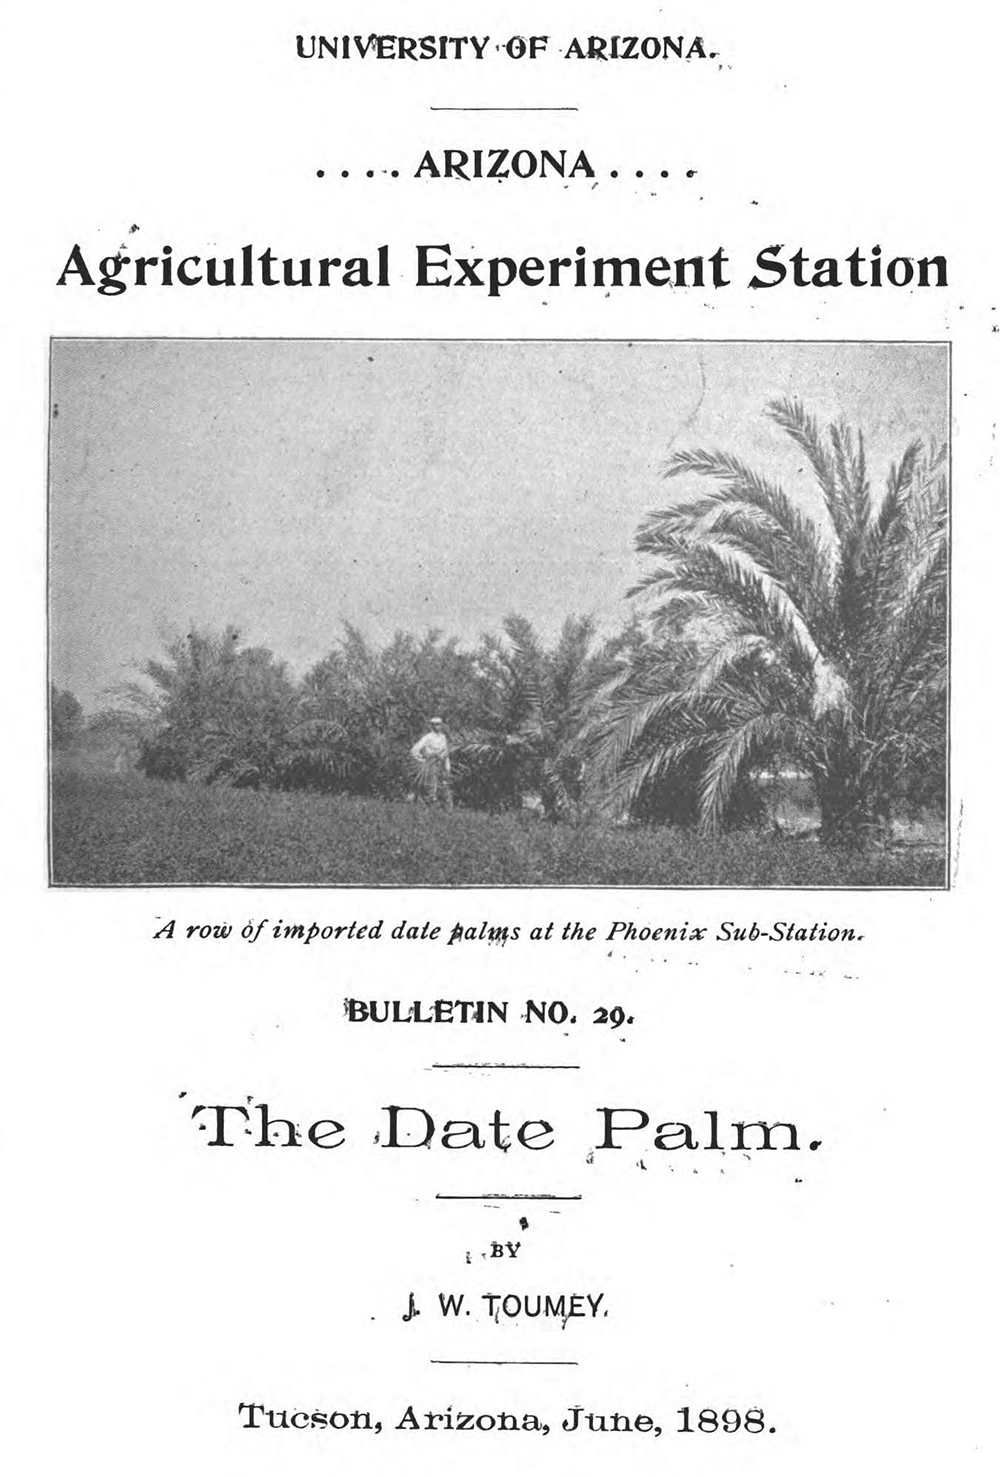 University of Arizona’s Agricultural Experiment Station bulletin dedicated entirely to the date palm.